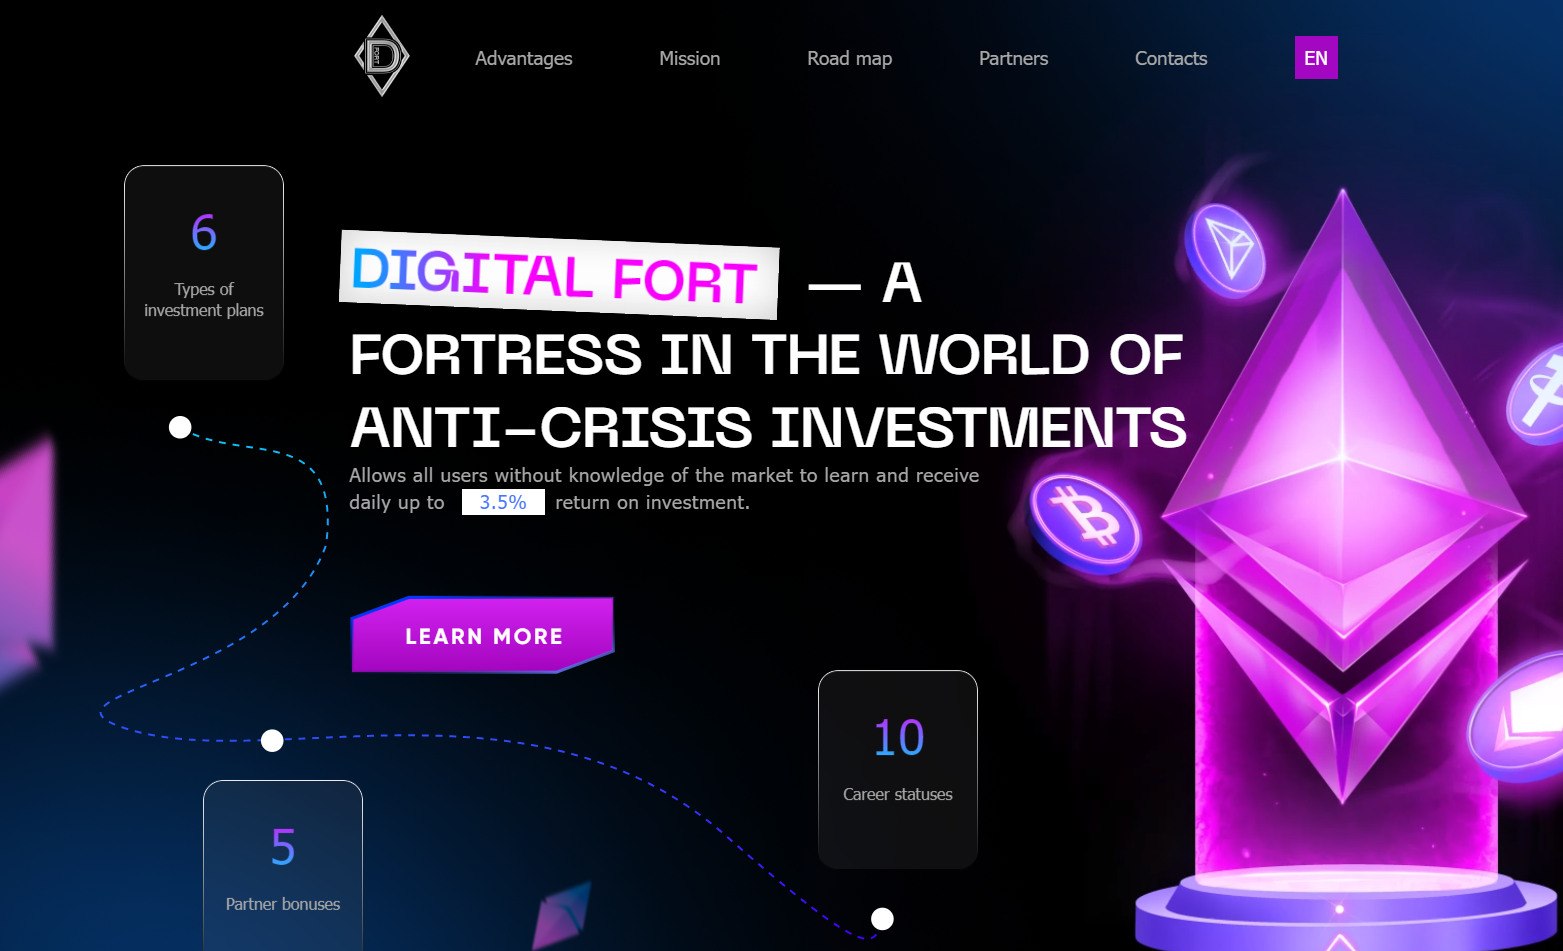 digital-fort.com review, digital-fort.com new hyip review,digital-fort.com scam or paying,digital-fort.com scam or legit,digital-fort.com full review details and status,digital-fort.com payout proof,digital-fort.com new hyip,digital-fort.com oxifinance hyip,new hyip,best hyip,legit hyip,top hyip,hourly paying hyip,long term paying hyip,instant paying hyip,best investment project